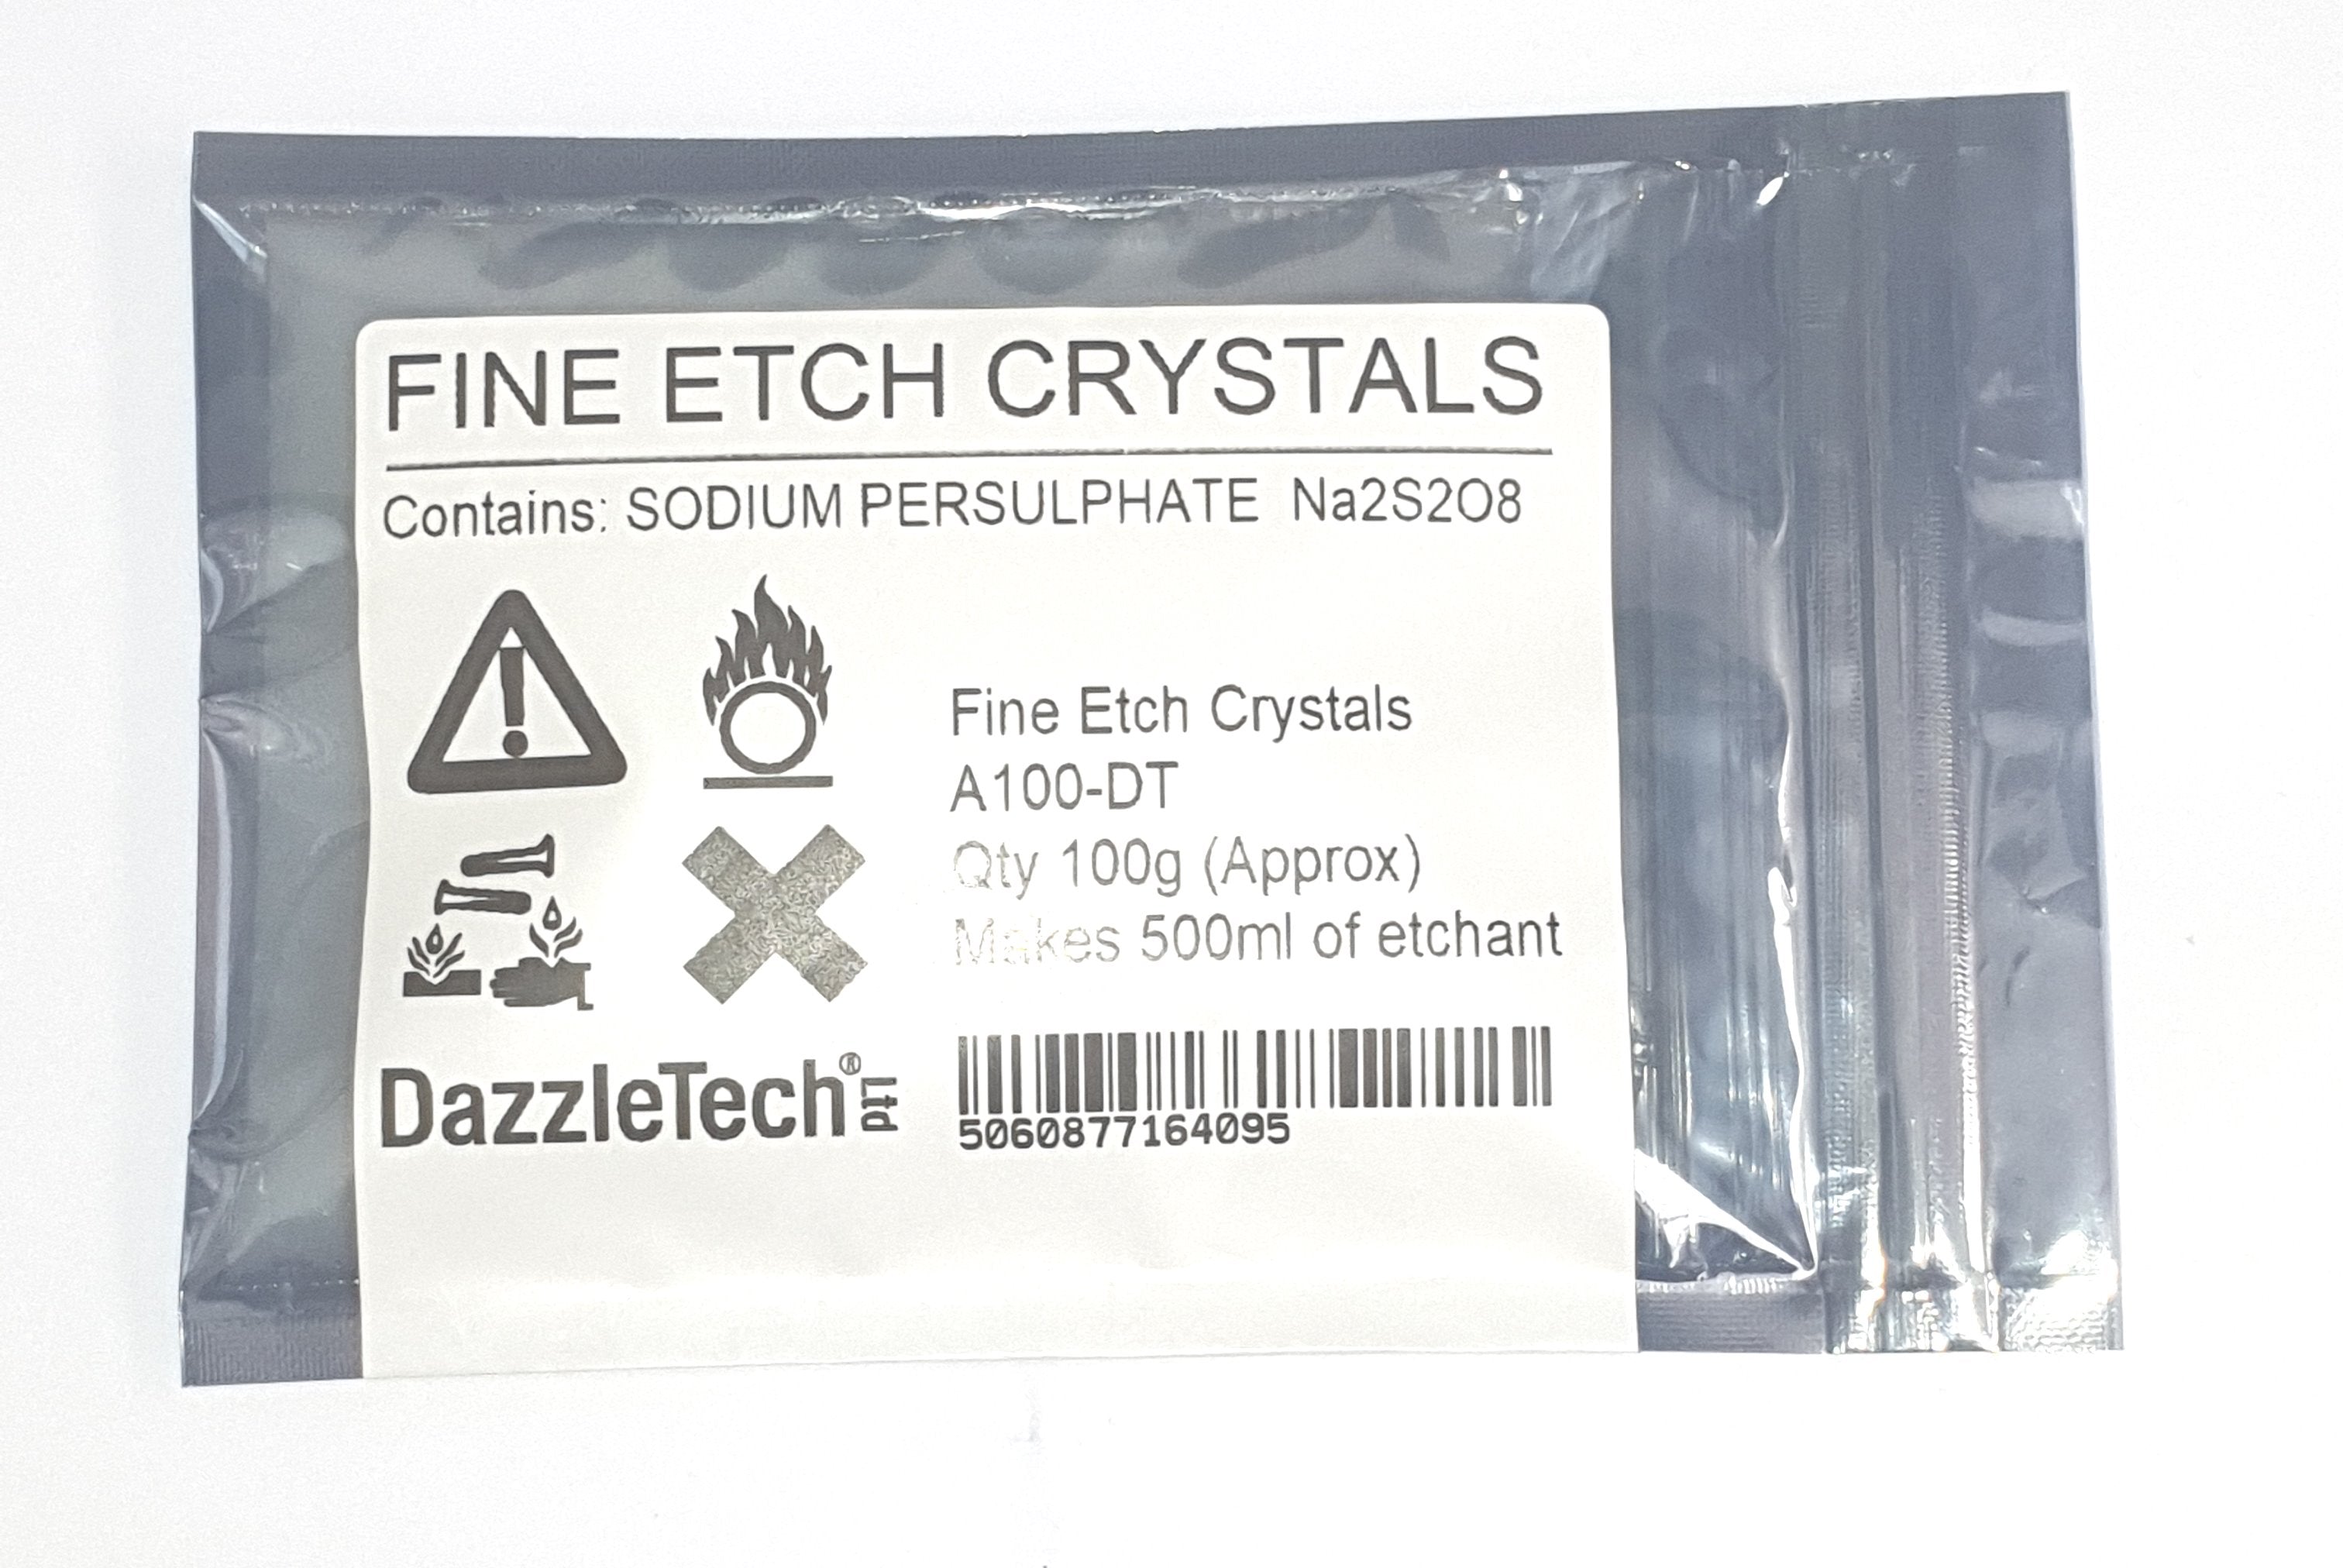 PCB Etchant Sodium Persulphate for copper clad PCB etching